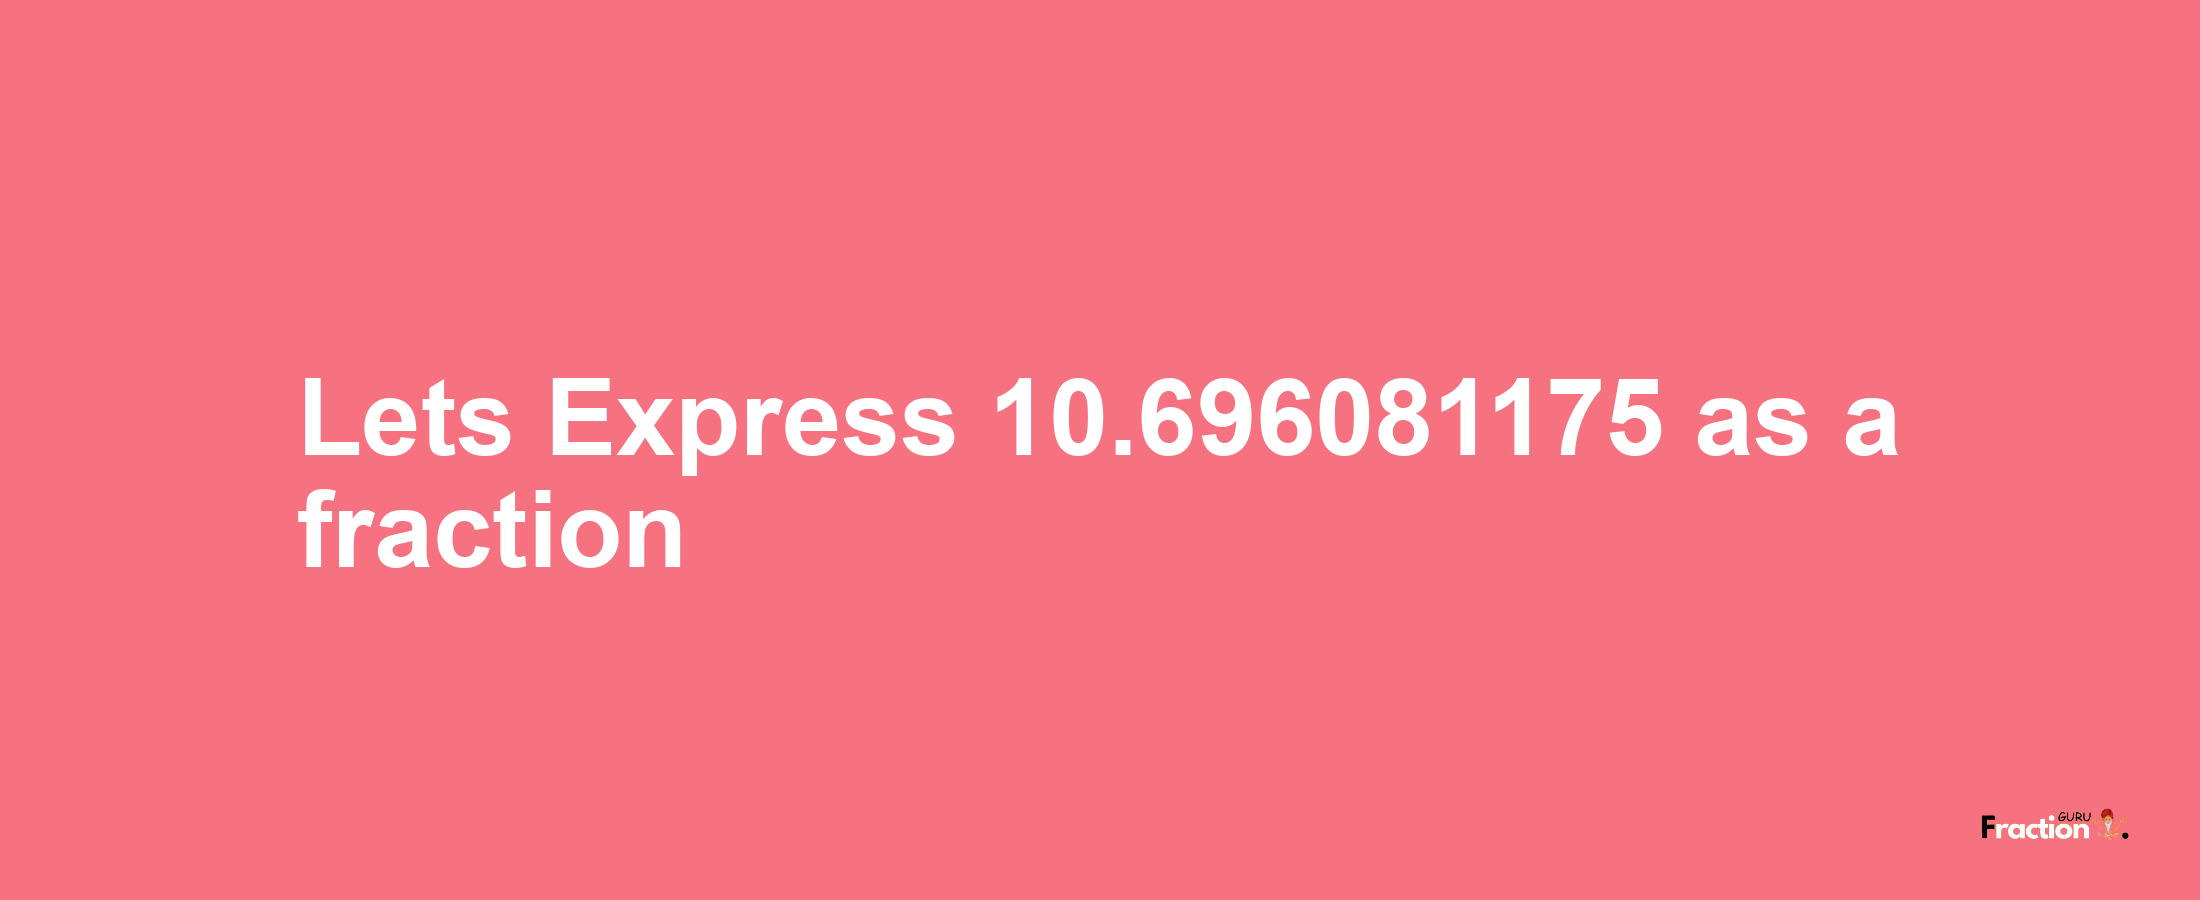 Lets Express 10.696081175 as afraction